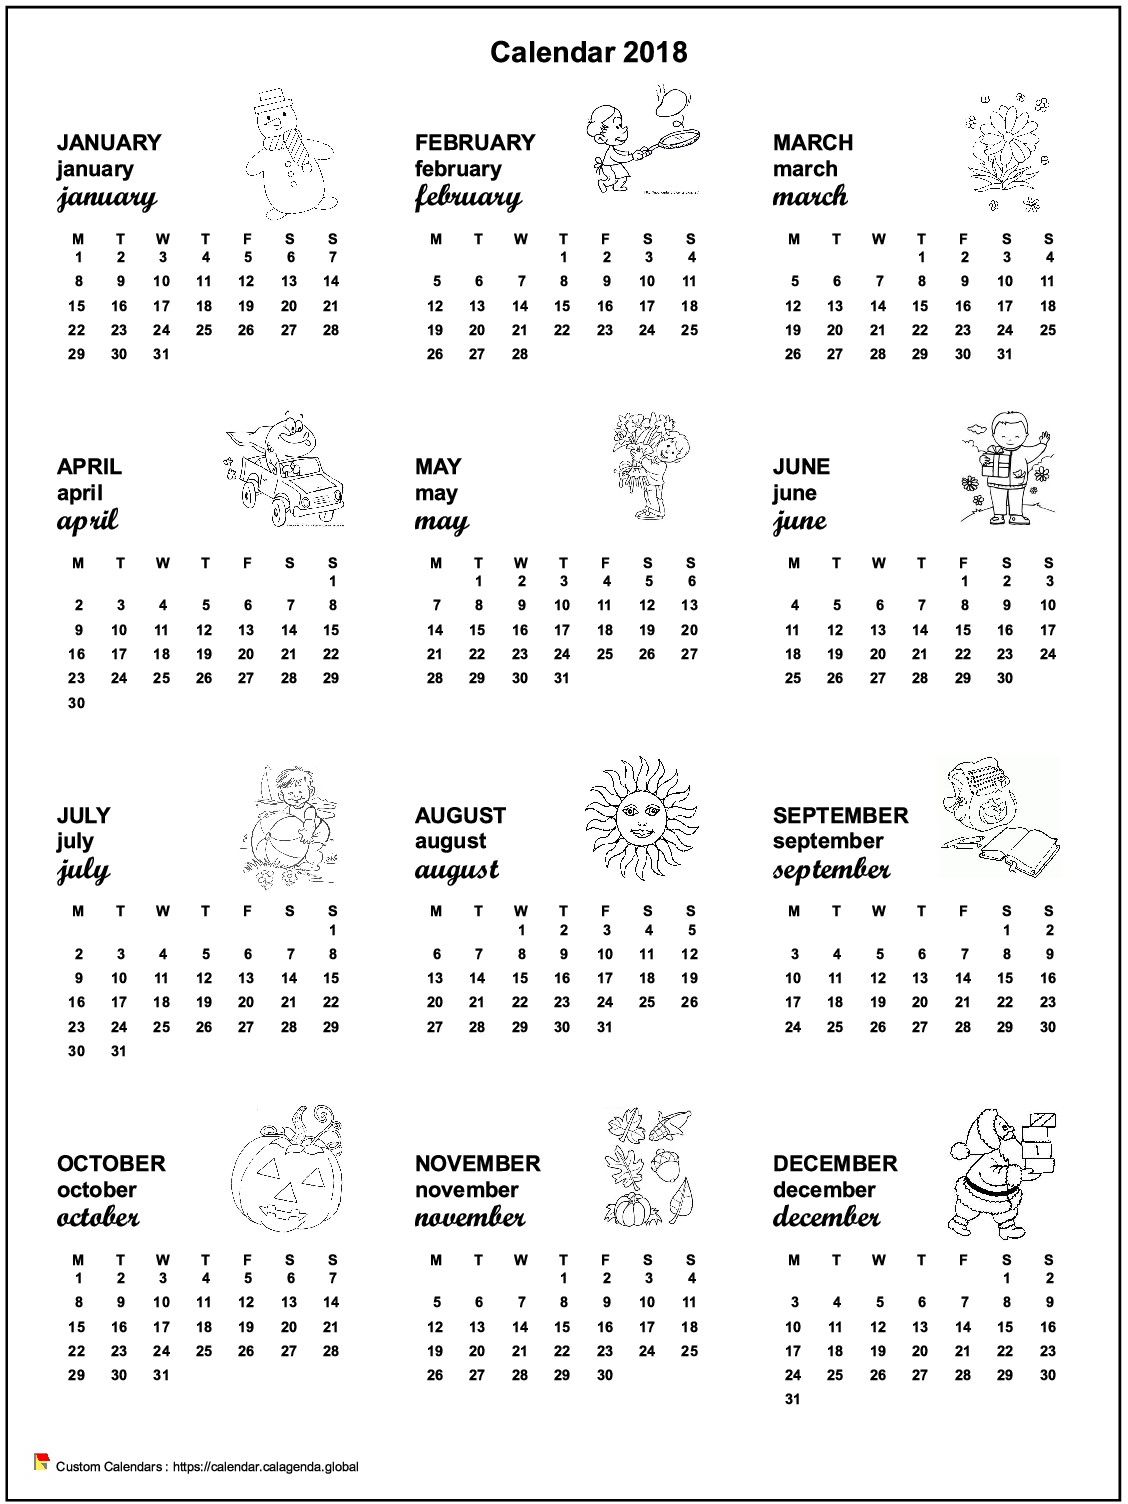 Calendar 2018 annual maternal and primary school